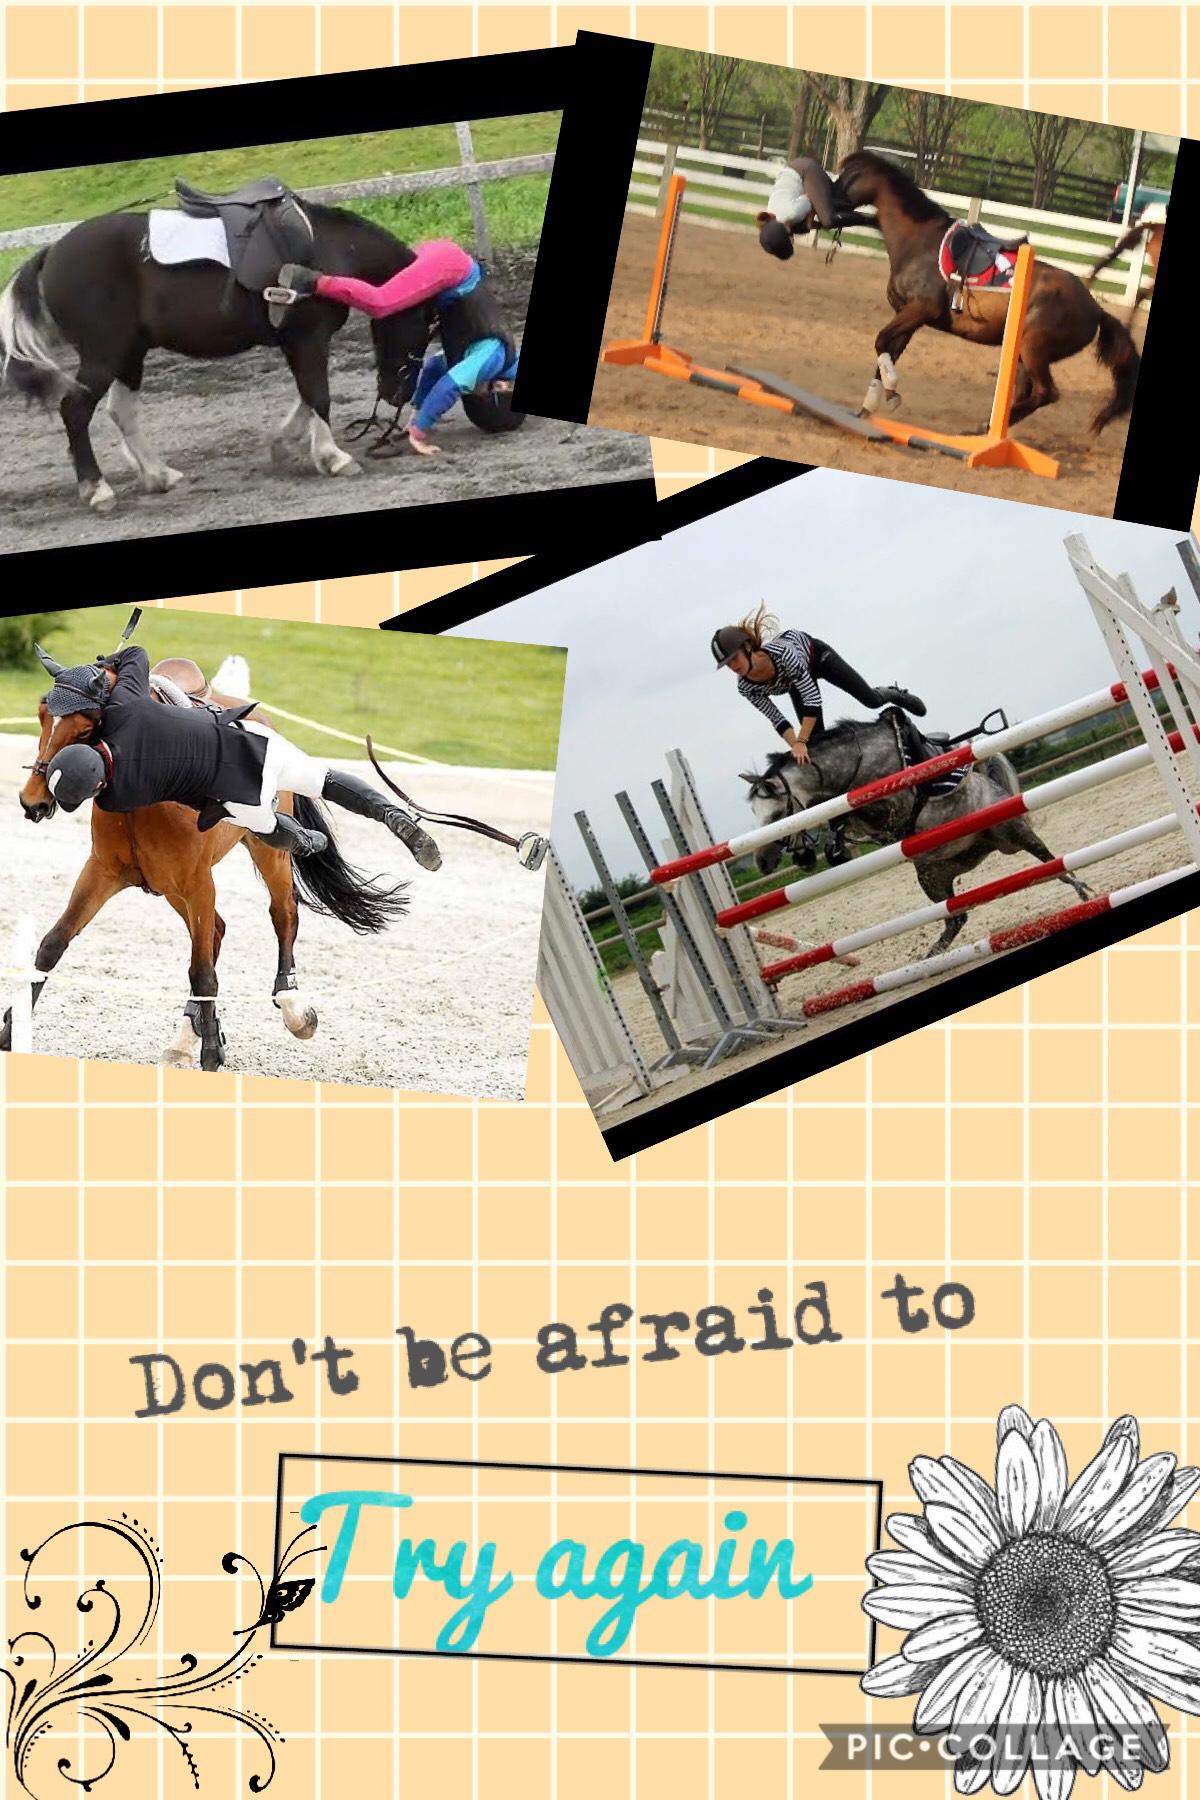 Collage by Jumping_Equine05